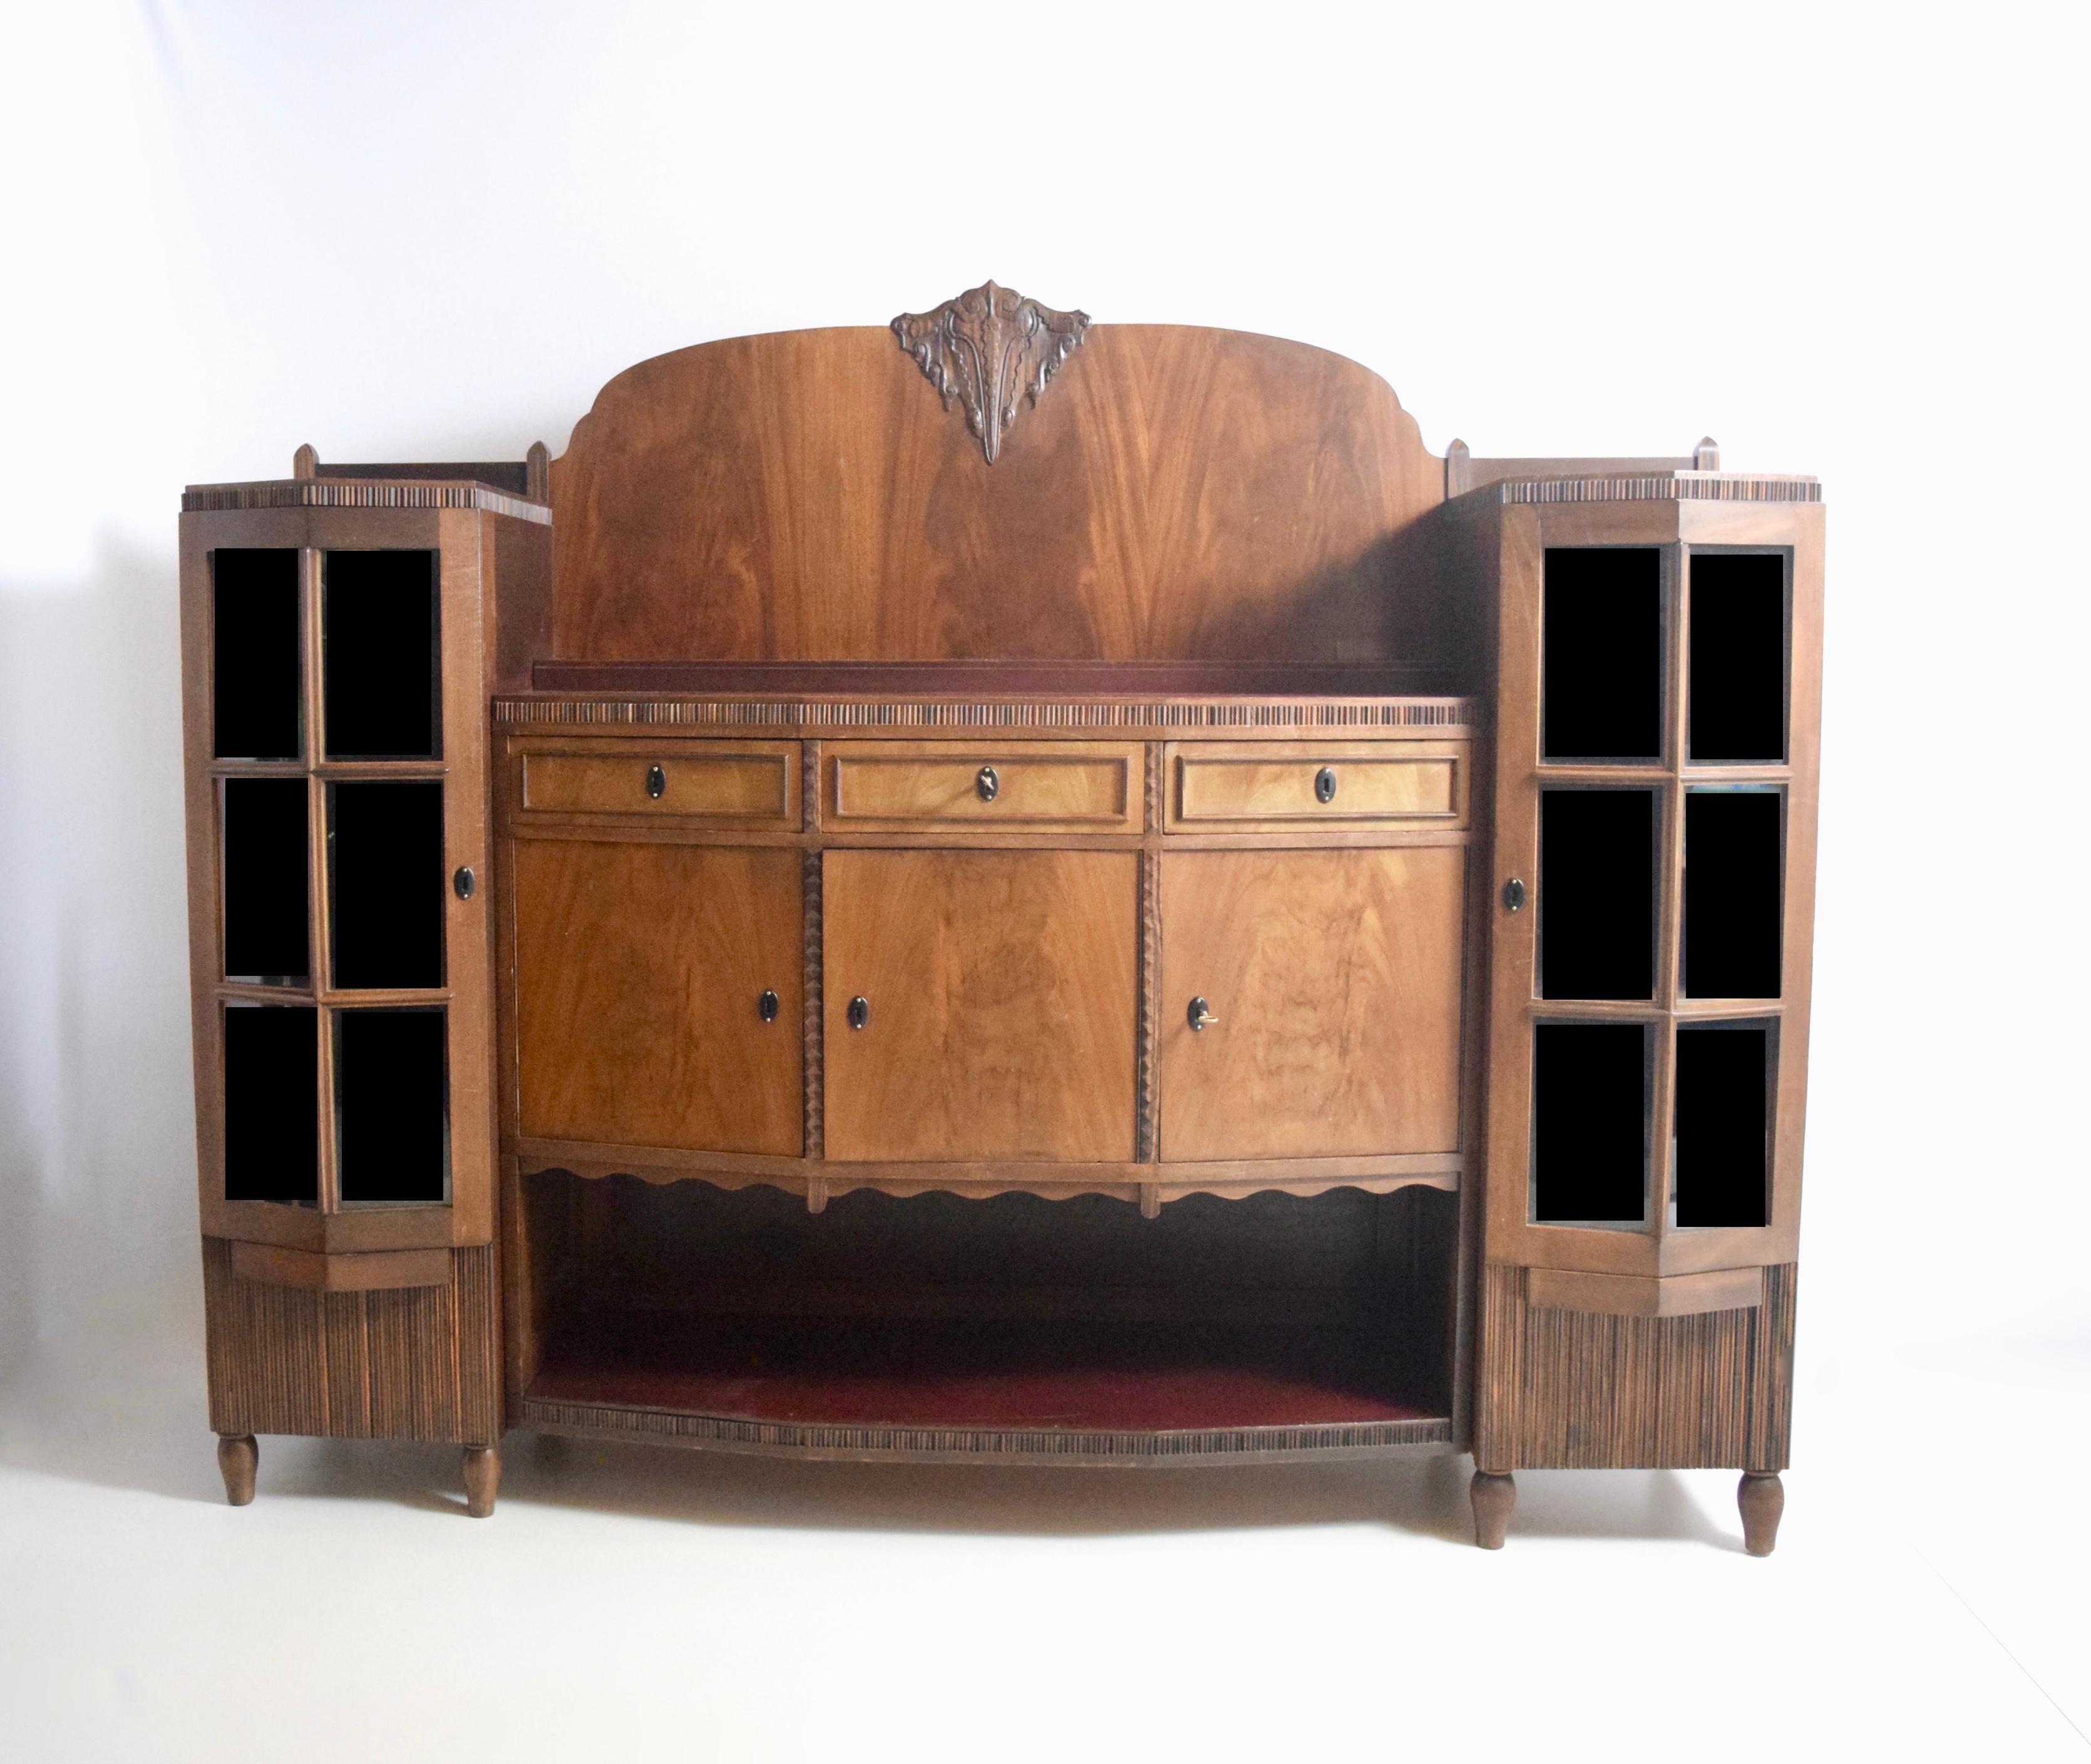 Impressive Amsterdam School bar cabinet by J.Th. Drilling, The Netherlands 1920s. This cabinet with mahogany and coromandel is a historic piece with the signature of the Firma Drilling on the keys.

The cabinet has two doors with facetted glass